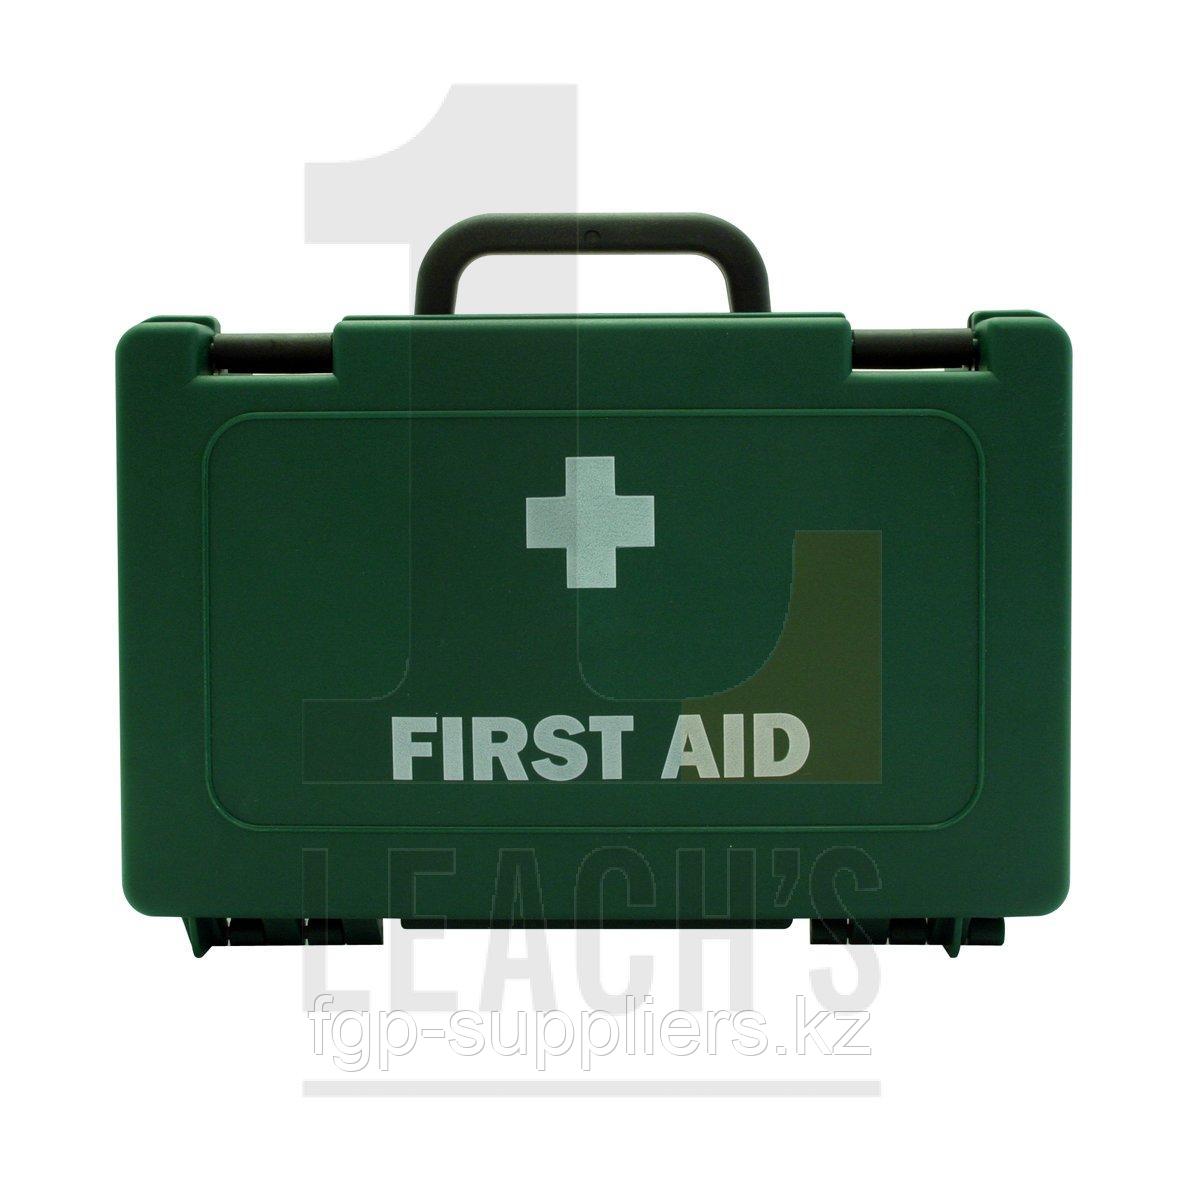 HSE 10 Person First Aid Kit / Аптечка на 10 человек